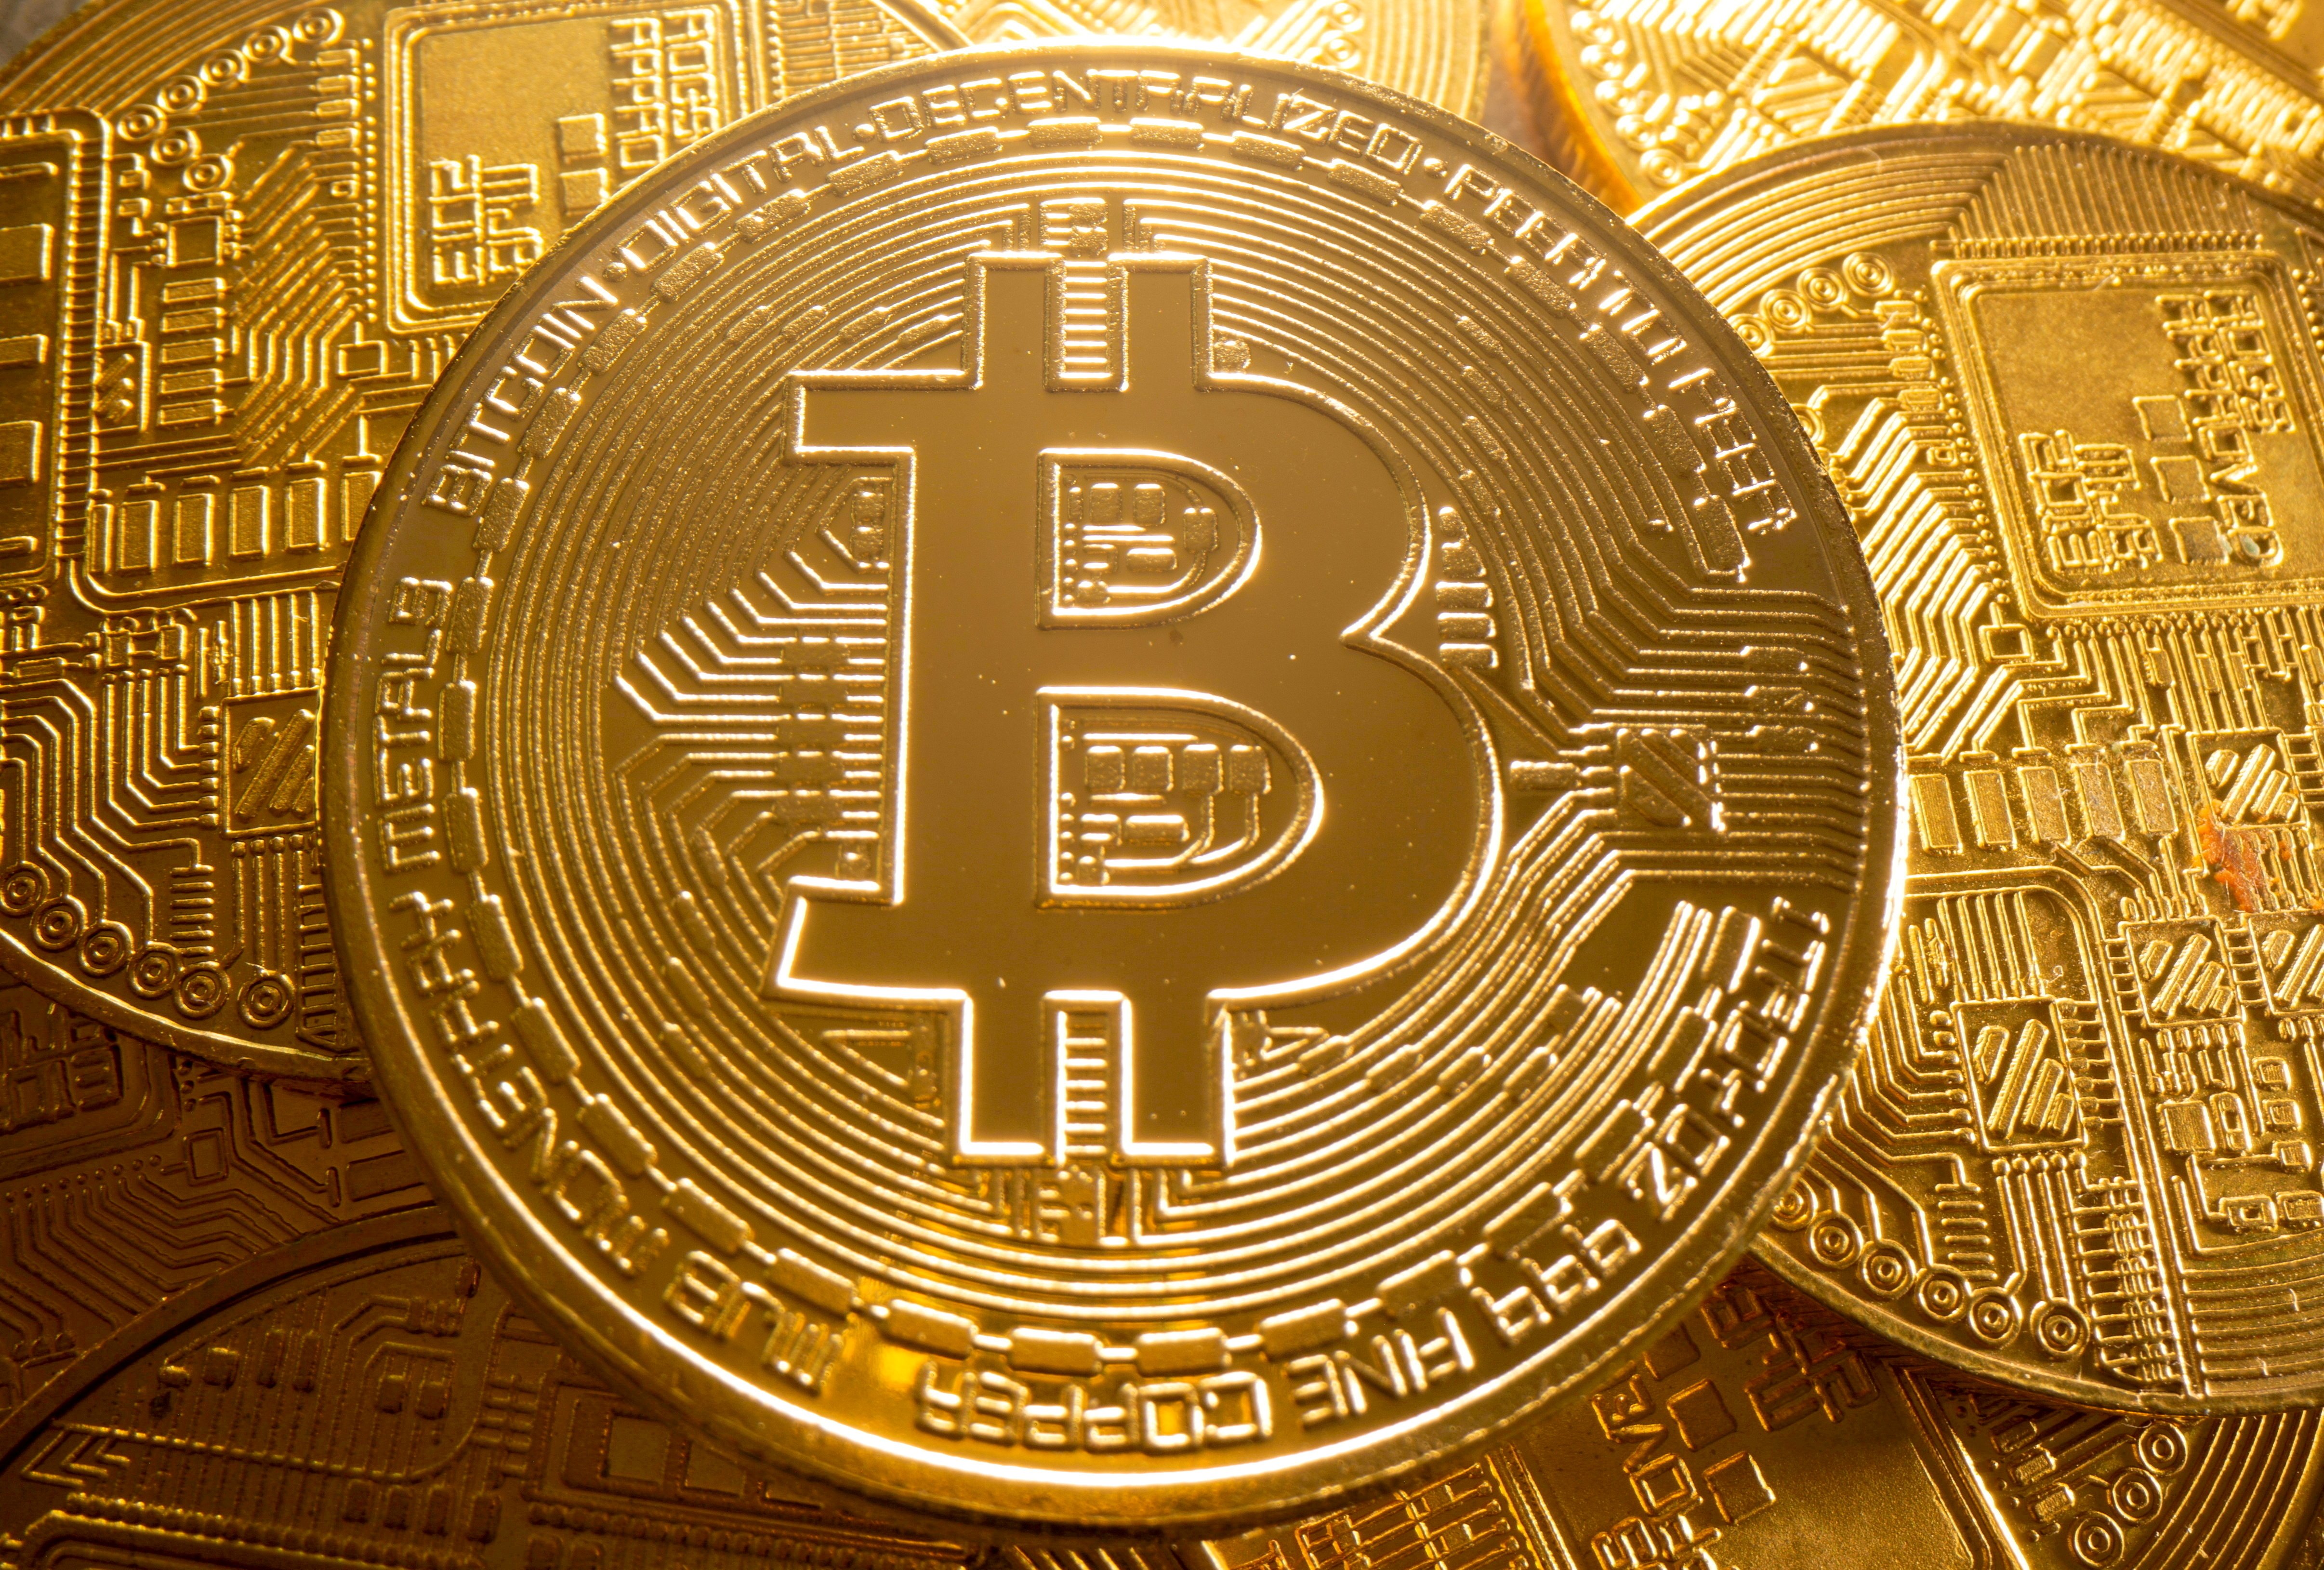 A representation of cryptocurrency Bitcoin is seen in this illustration. (CNS photo/Dado Ruvic, Reuters)